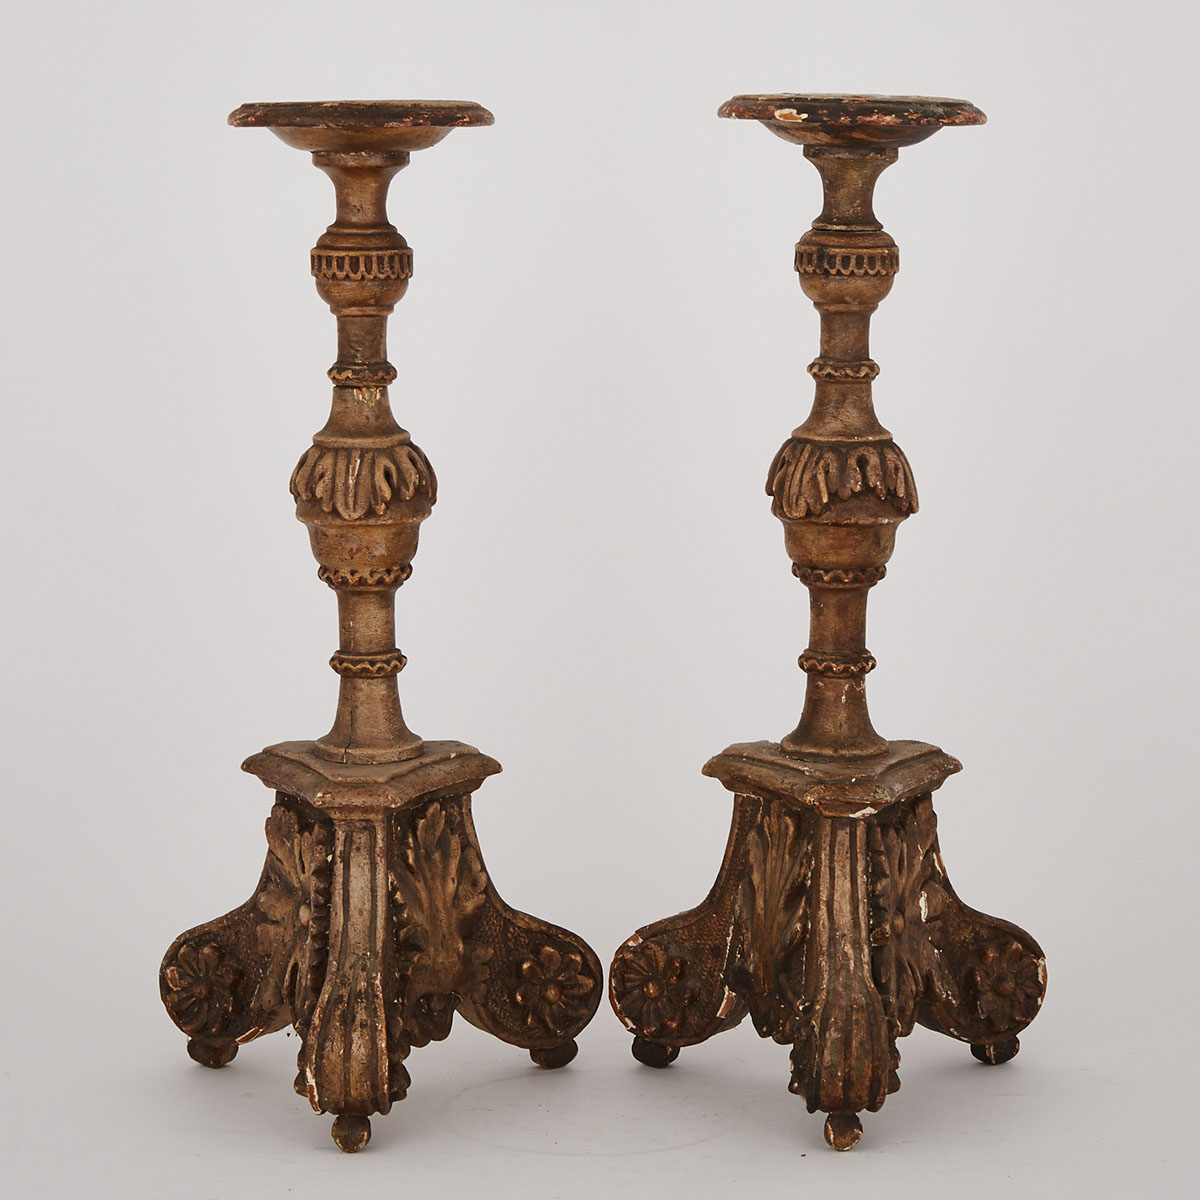 Pair of Italian Carved and Silver Gilt Altar Prickets, mid 19th century